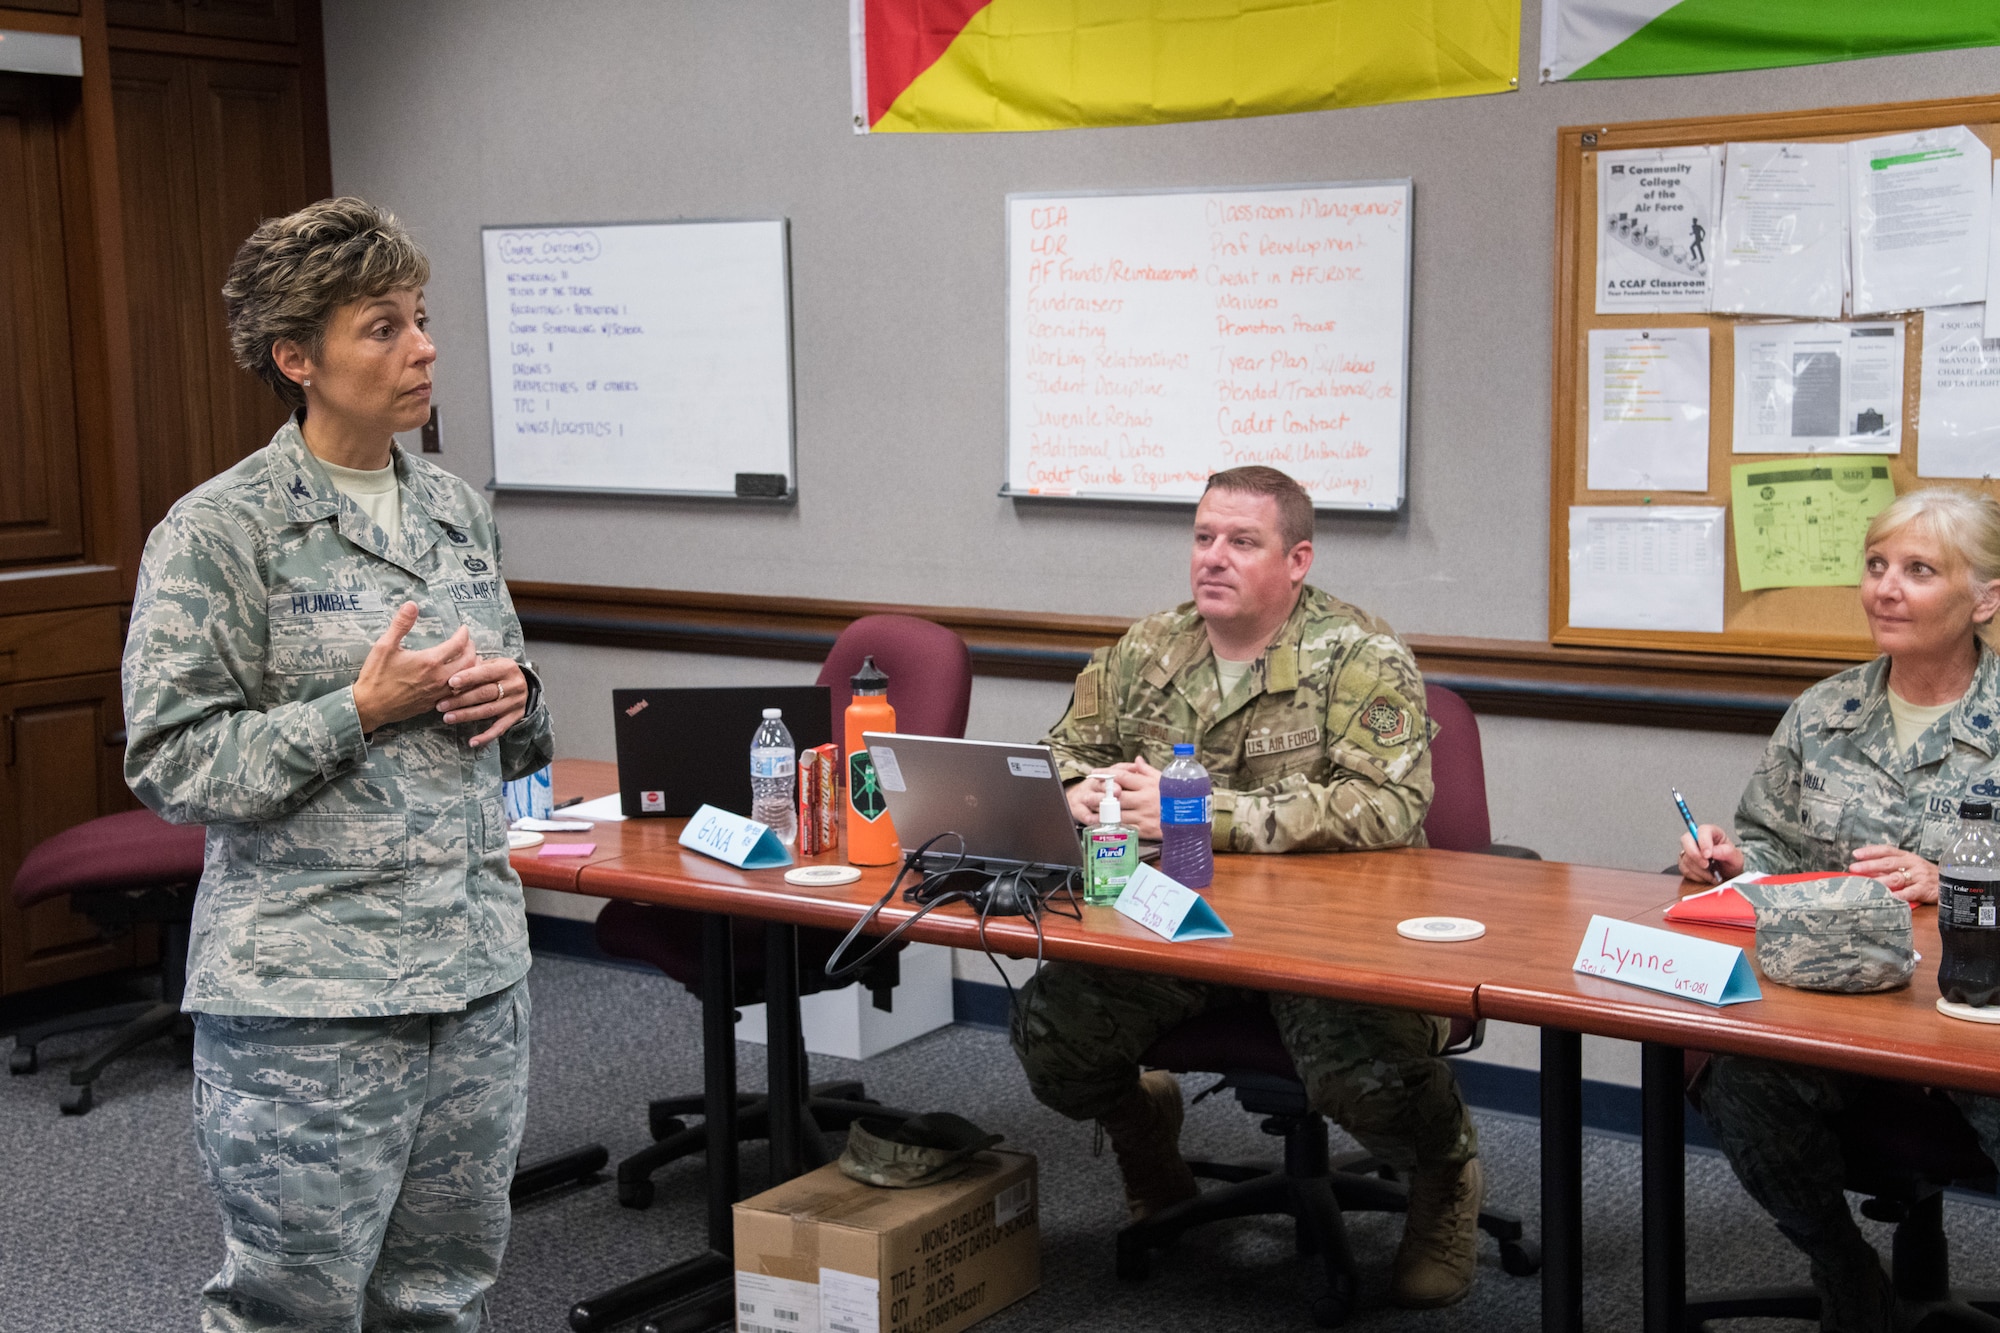 Retired Col. Gina Humble, an Air Force Junior ROTC instructor at Baltimore Polytech Institute, teaches a class, June 20, during the Air Force Junior ROTC Instructor Certification Course held at the Air Force Senior NCO Academy at Maxwell-Gunter Air Force Base, Alabama, June 12-21, 2019. Humble was named the 2019 Air Force Junior ROTC Instructor of the Year, Senior Aerospace Science Instructor category. (U.S. Air Force photo by William Birchfield)